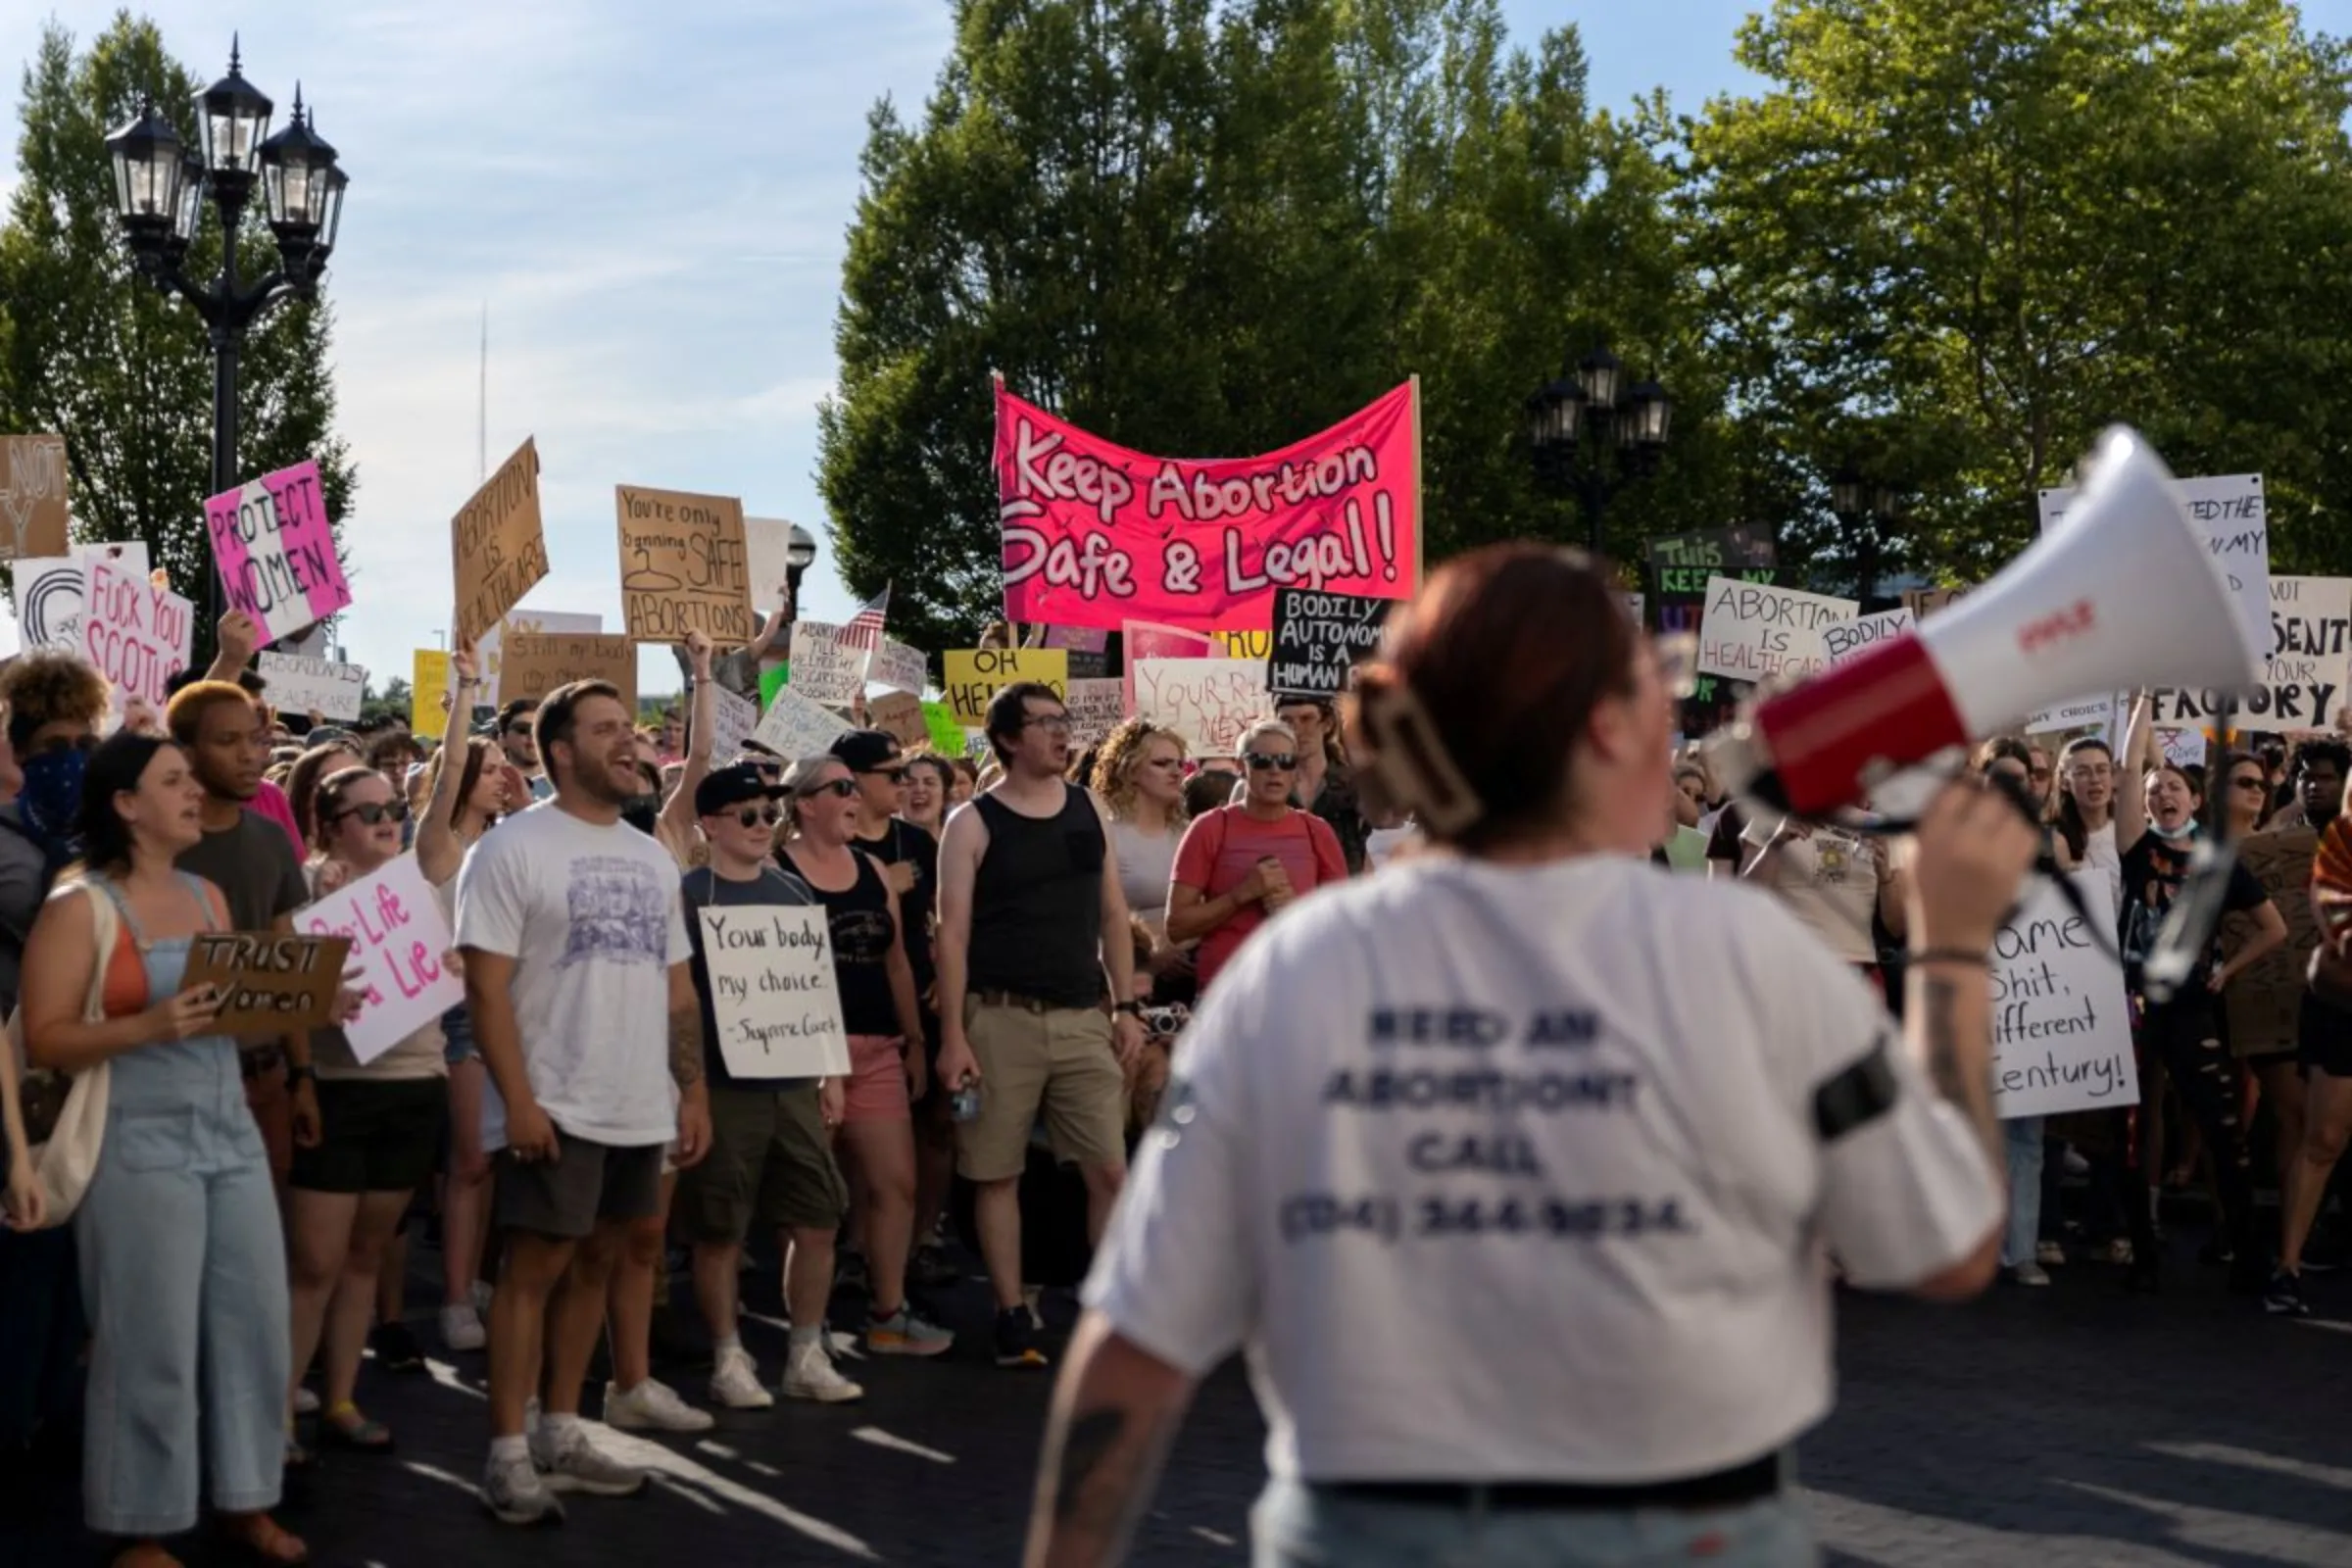 Abortion rights protesters gather for a rally in Columbus, Ohio, after the United States Supreme Court ruled in the Dobbs v Women's Health Organization abortion case, overturning the landmark Roe v Wade abortion decision, June 24, 2022